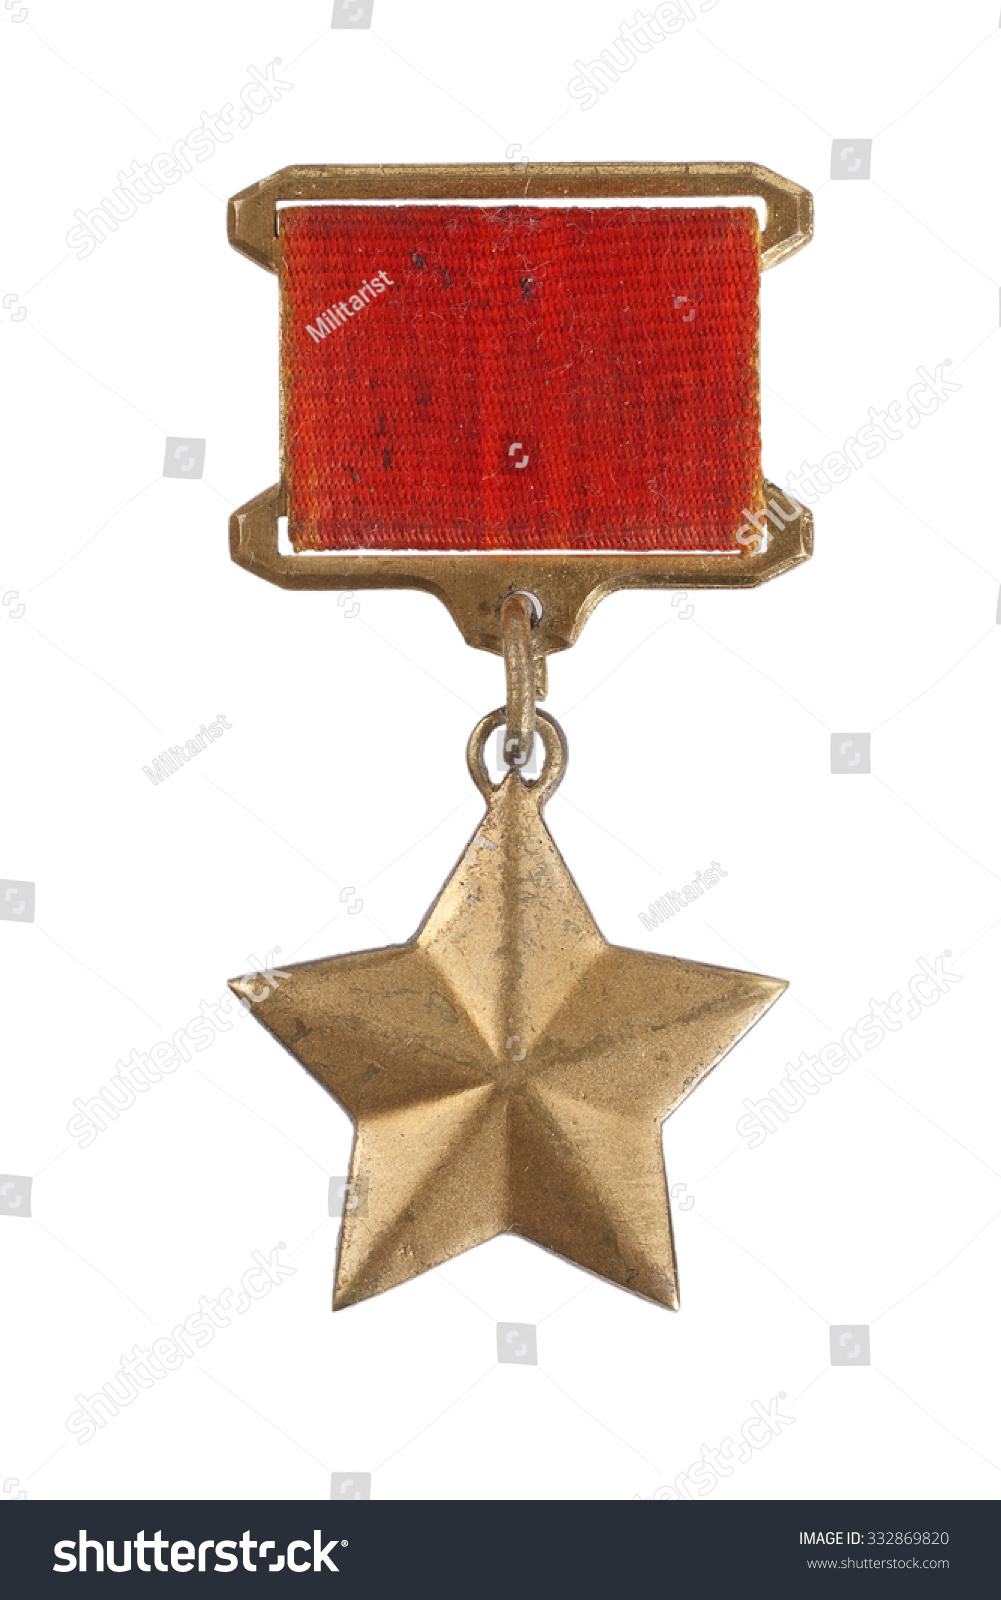 The Gold Star medal is a special insignia that identifies recipients of the title "Hero" in the Soviet Union #332869820